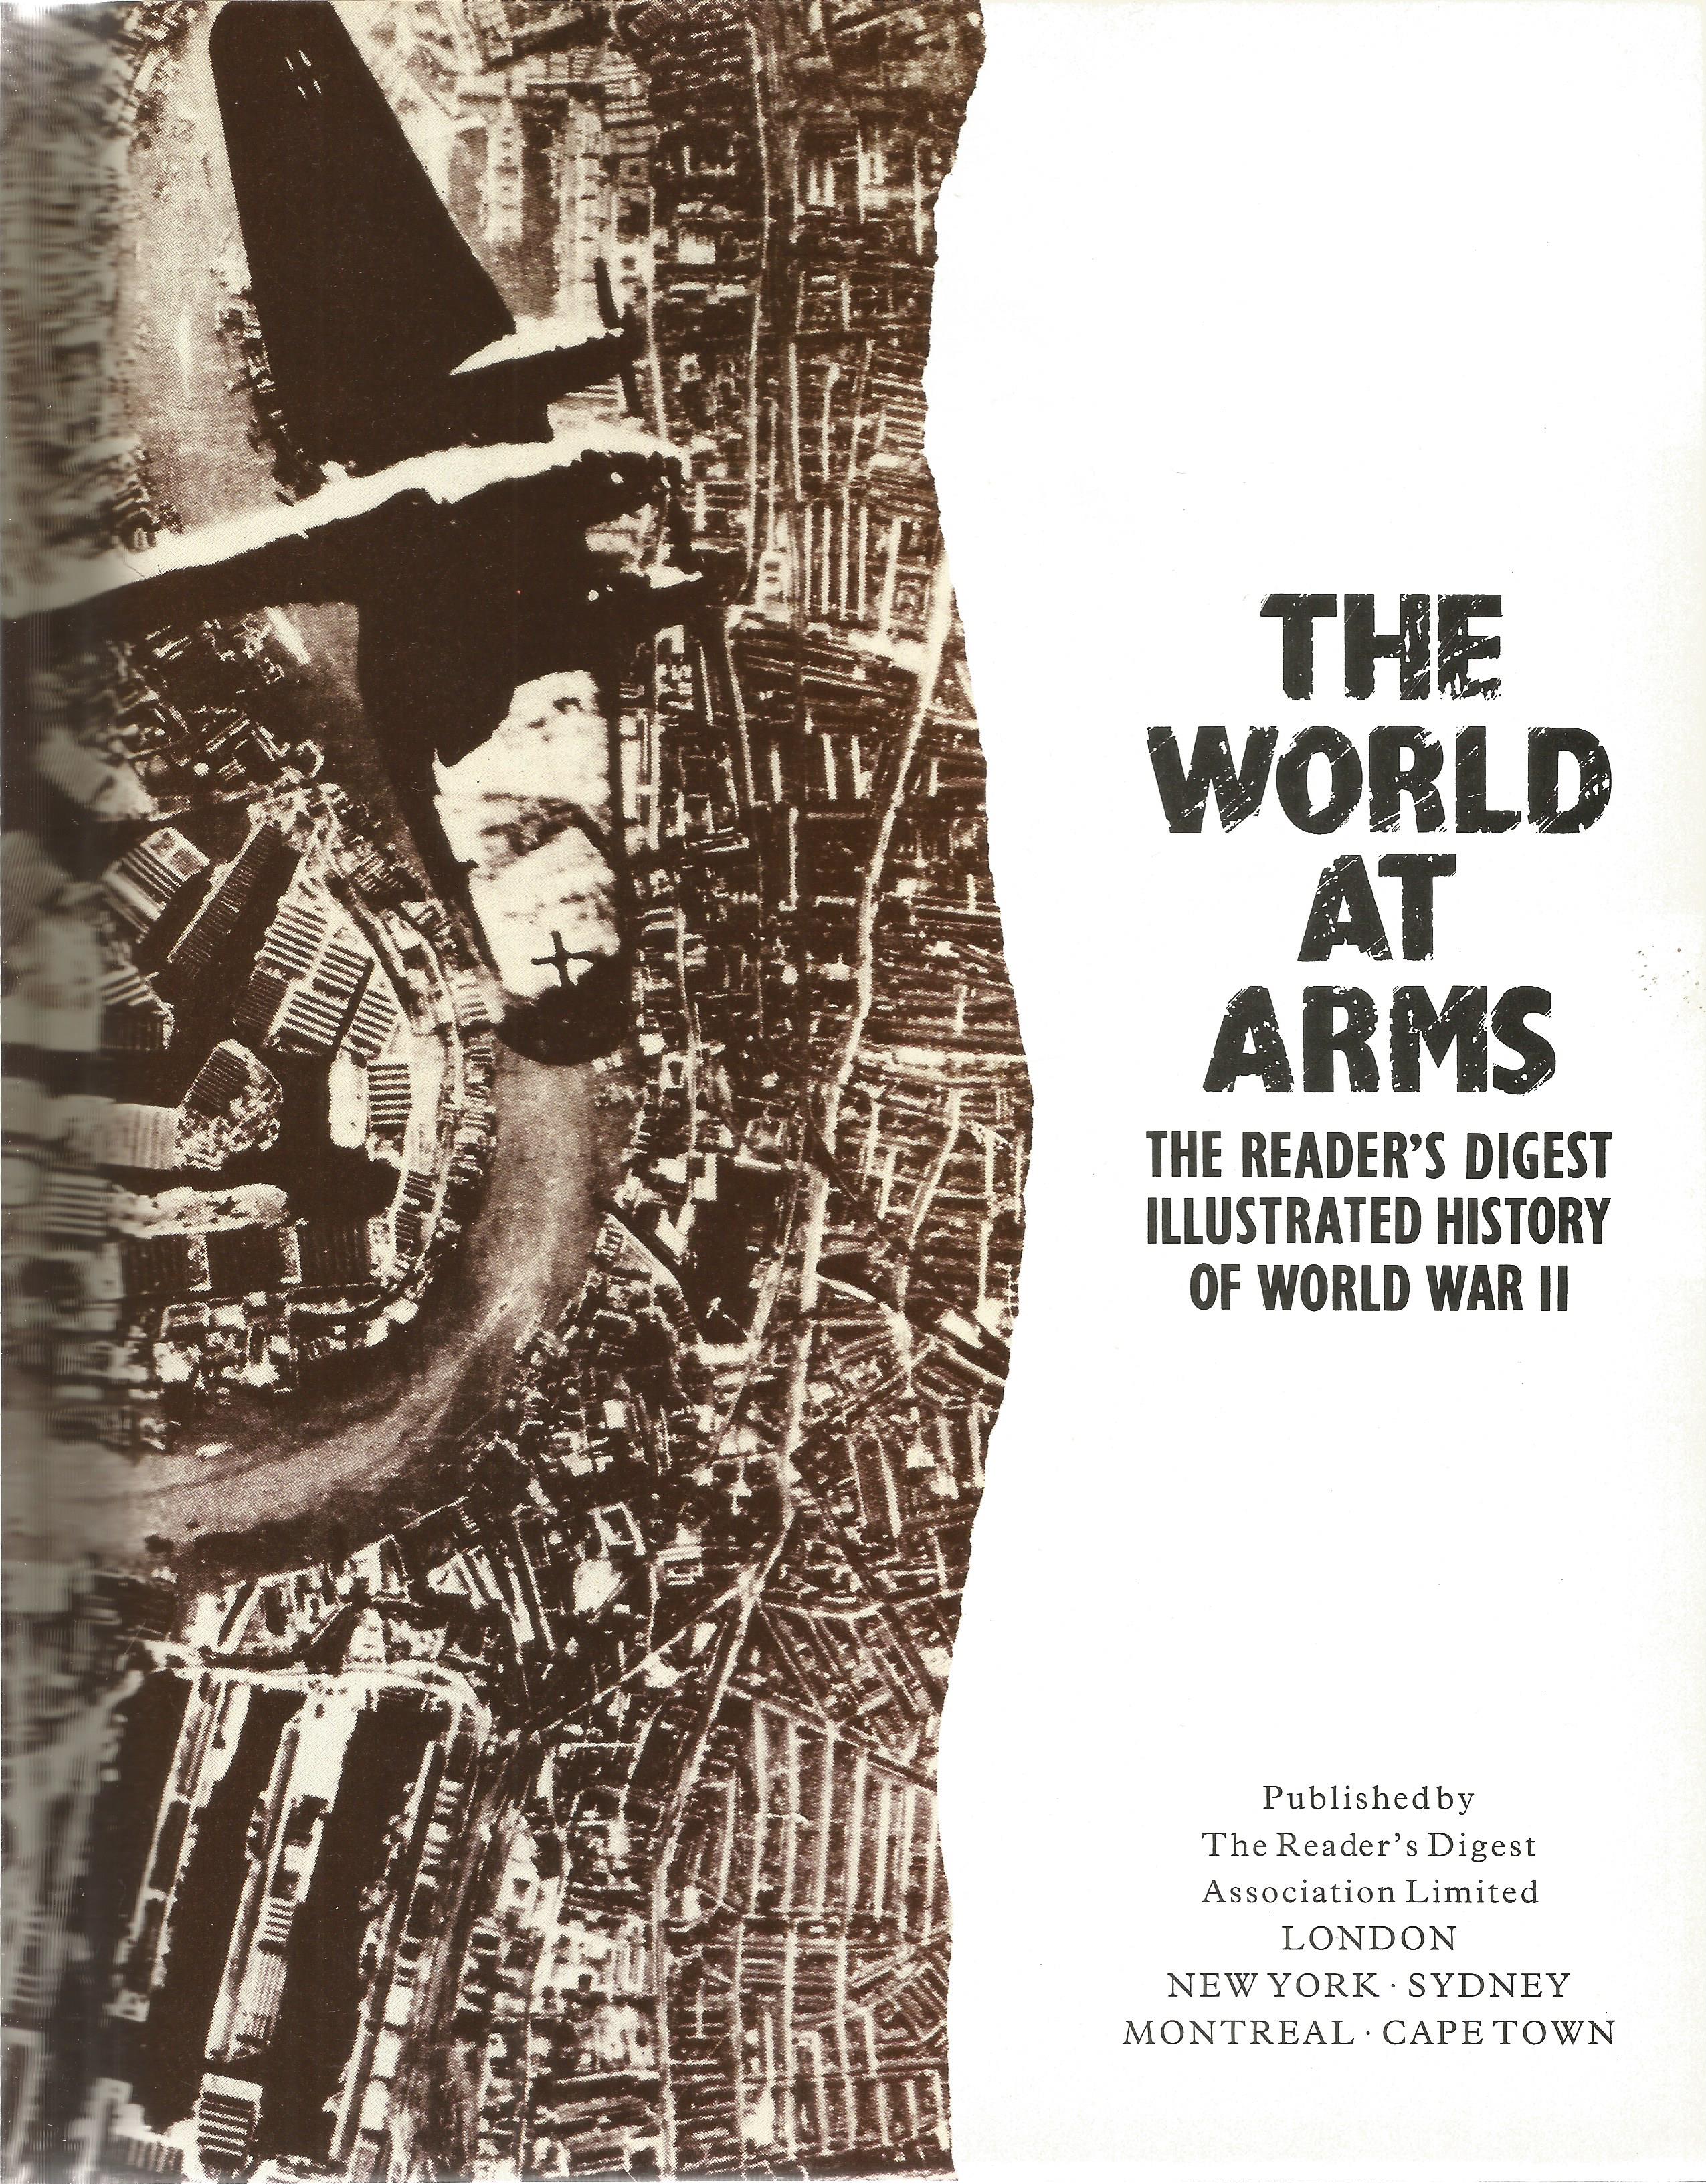 Reader's Digest The World At Arms Illustrated History of World War II 1989 First Edition Hardback - Image 2 of 3